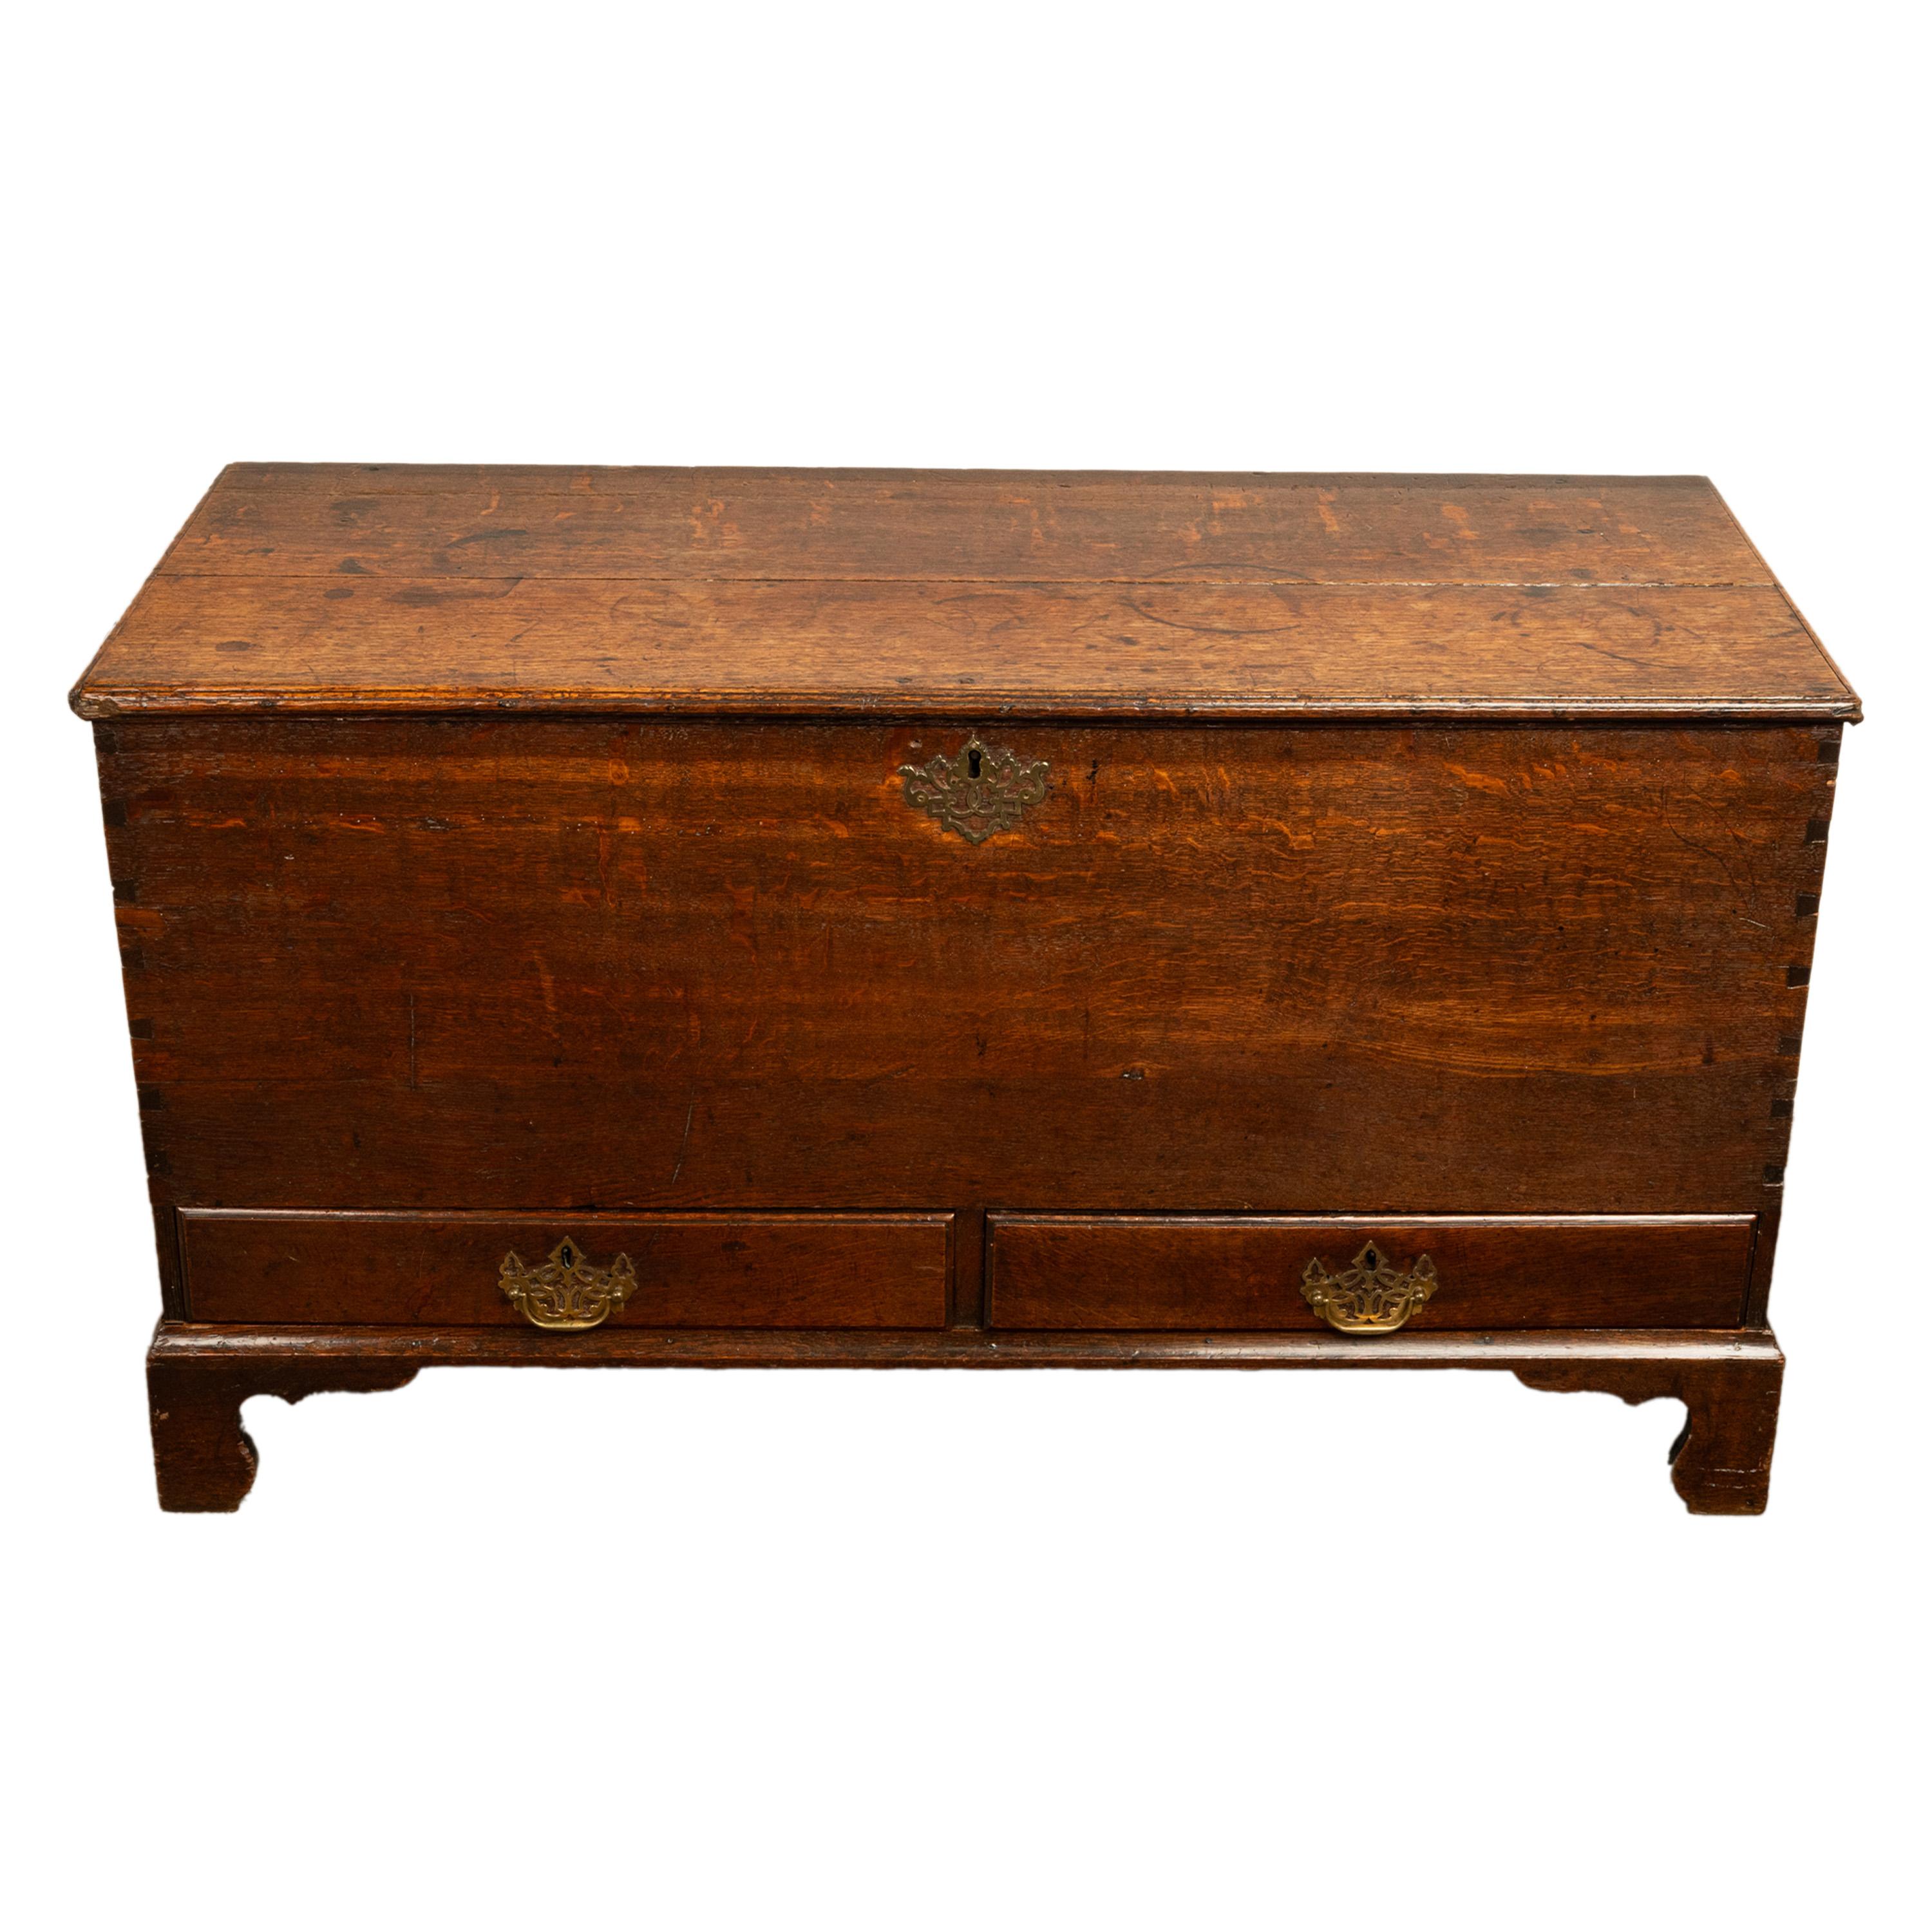 English Antique George III Georgian Oak Dovetailed Mule Chest Coffer Drawers 1760 For Sale